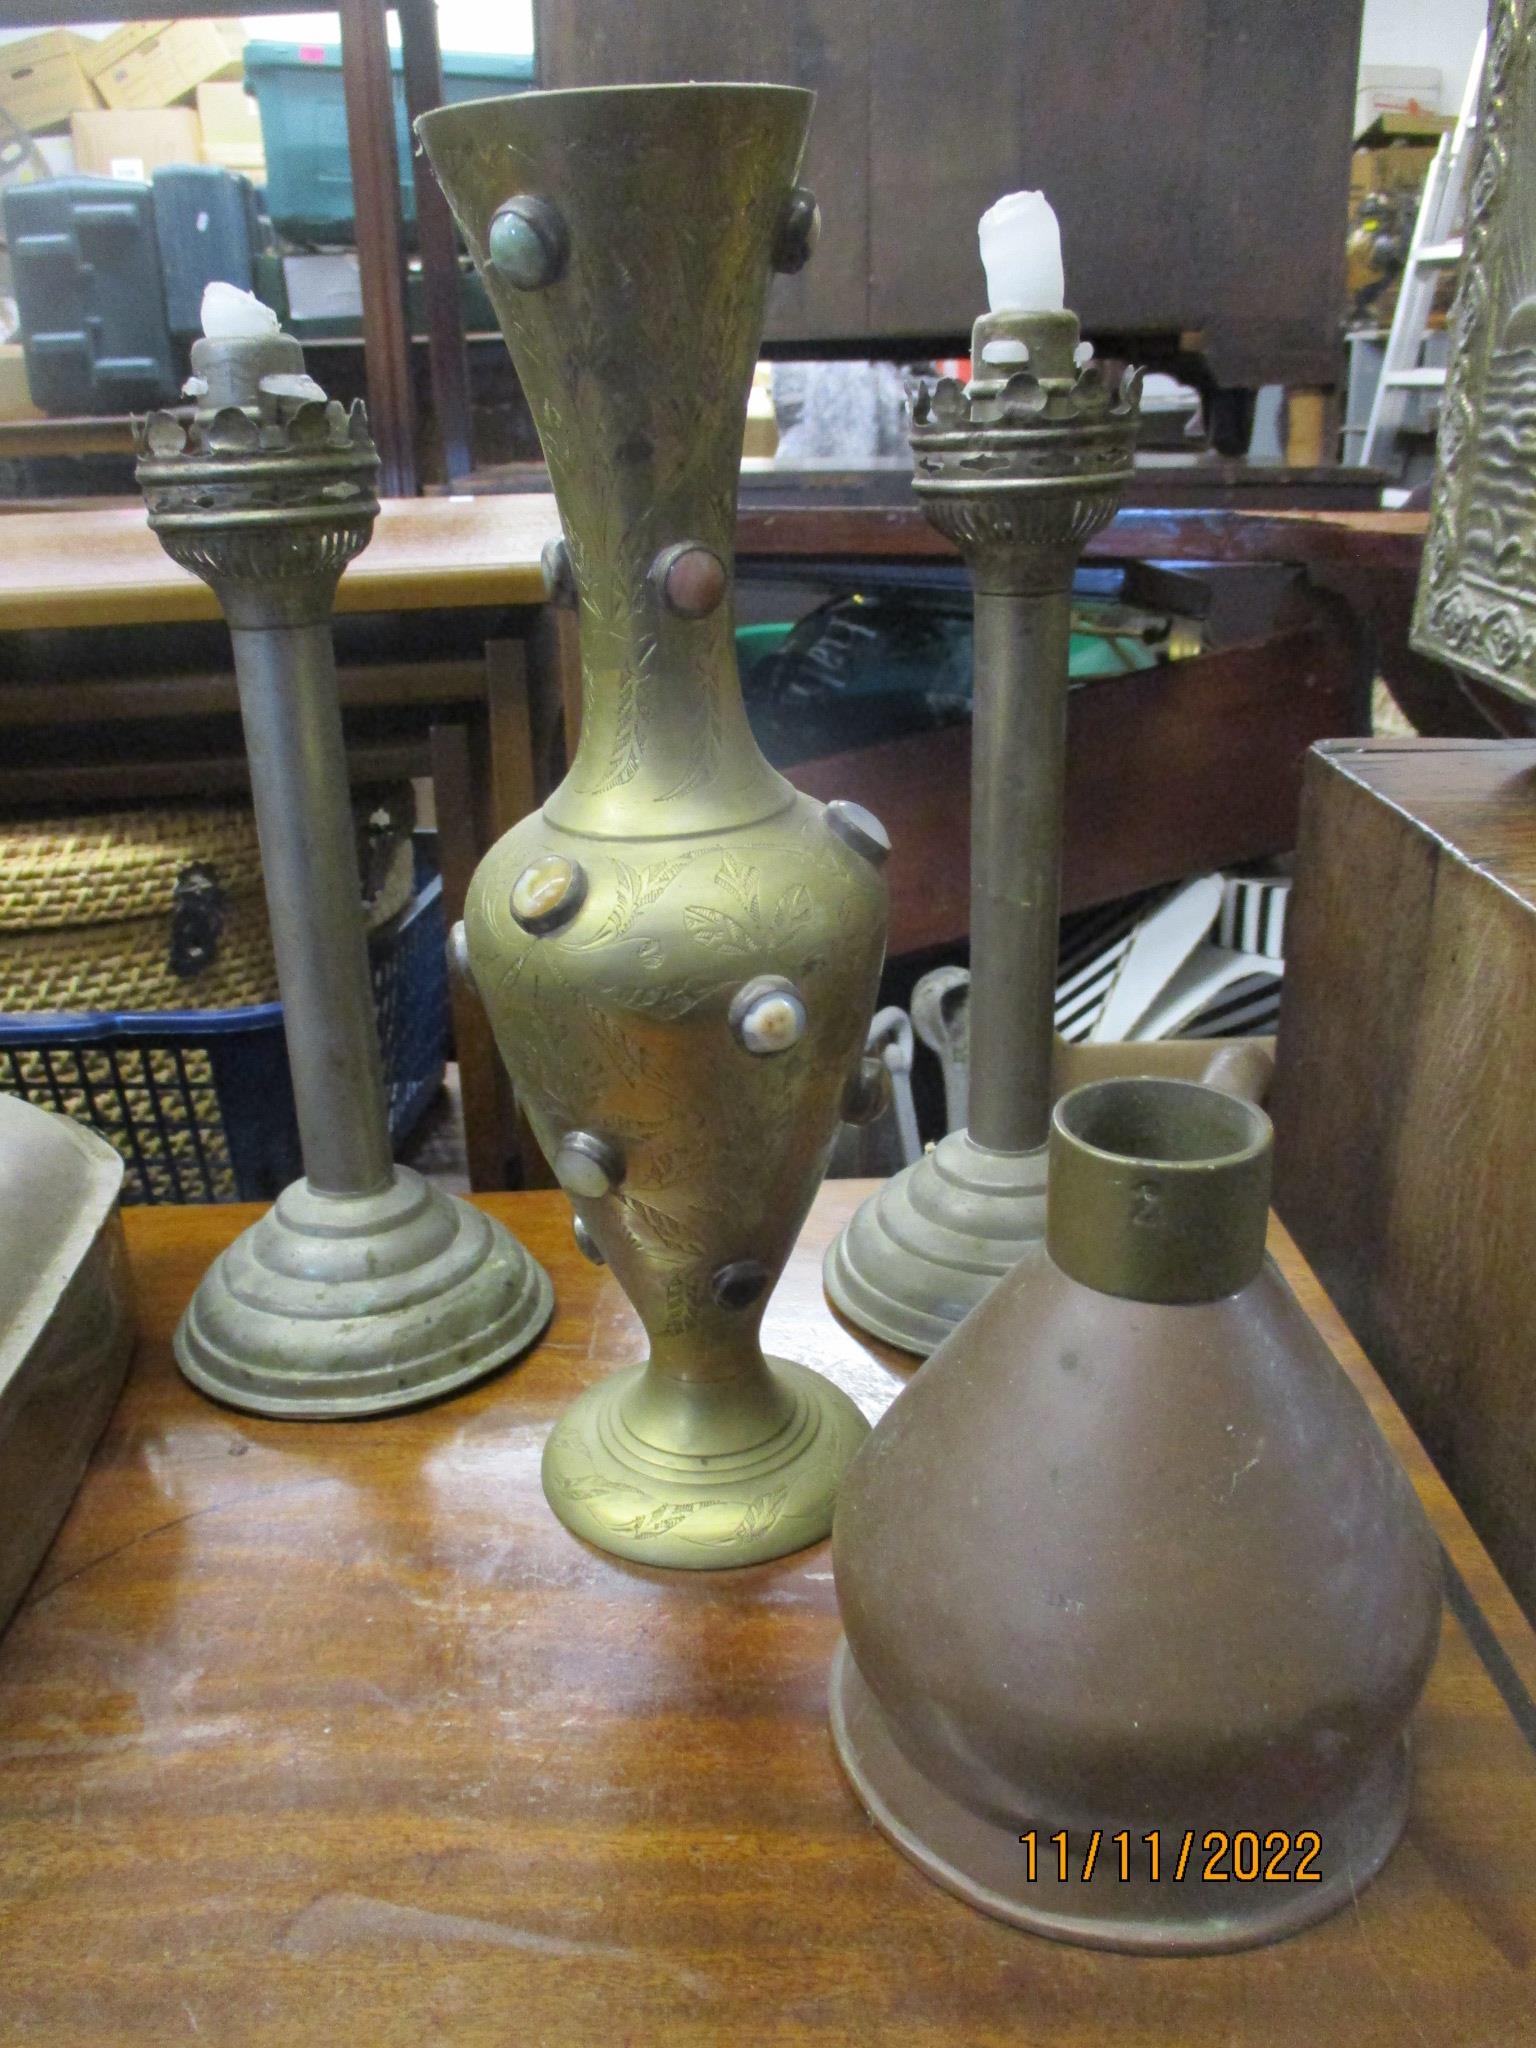 Metalware to include two coal scuttles, a slipper box, a magazine rack, candlesticks, teapot and